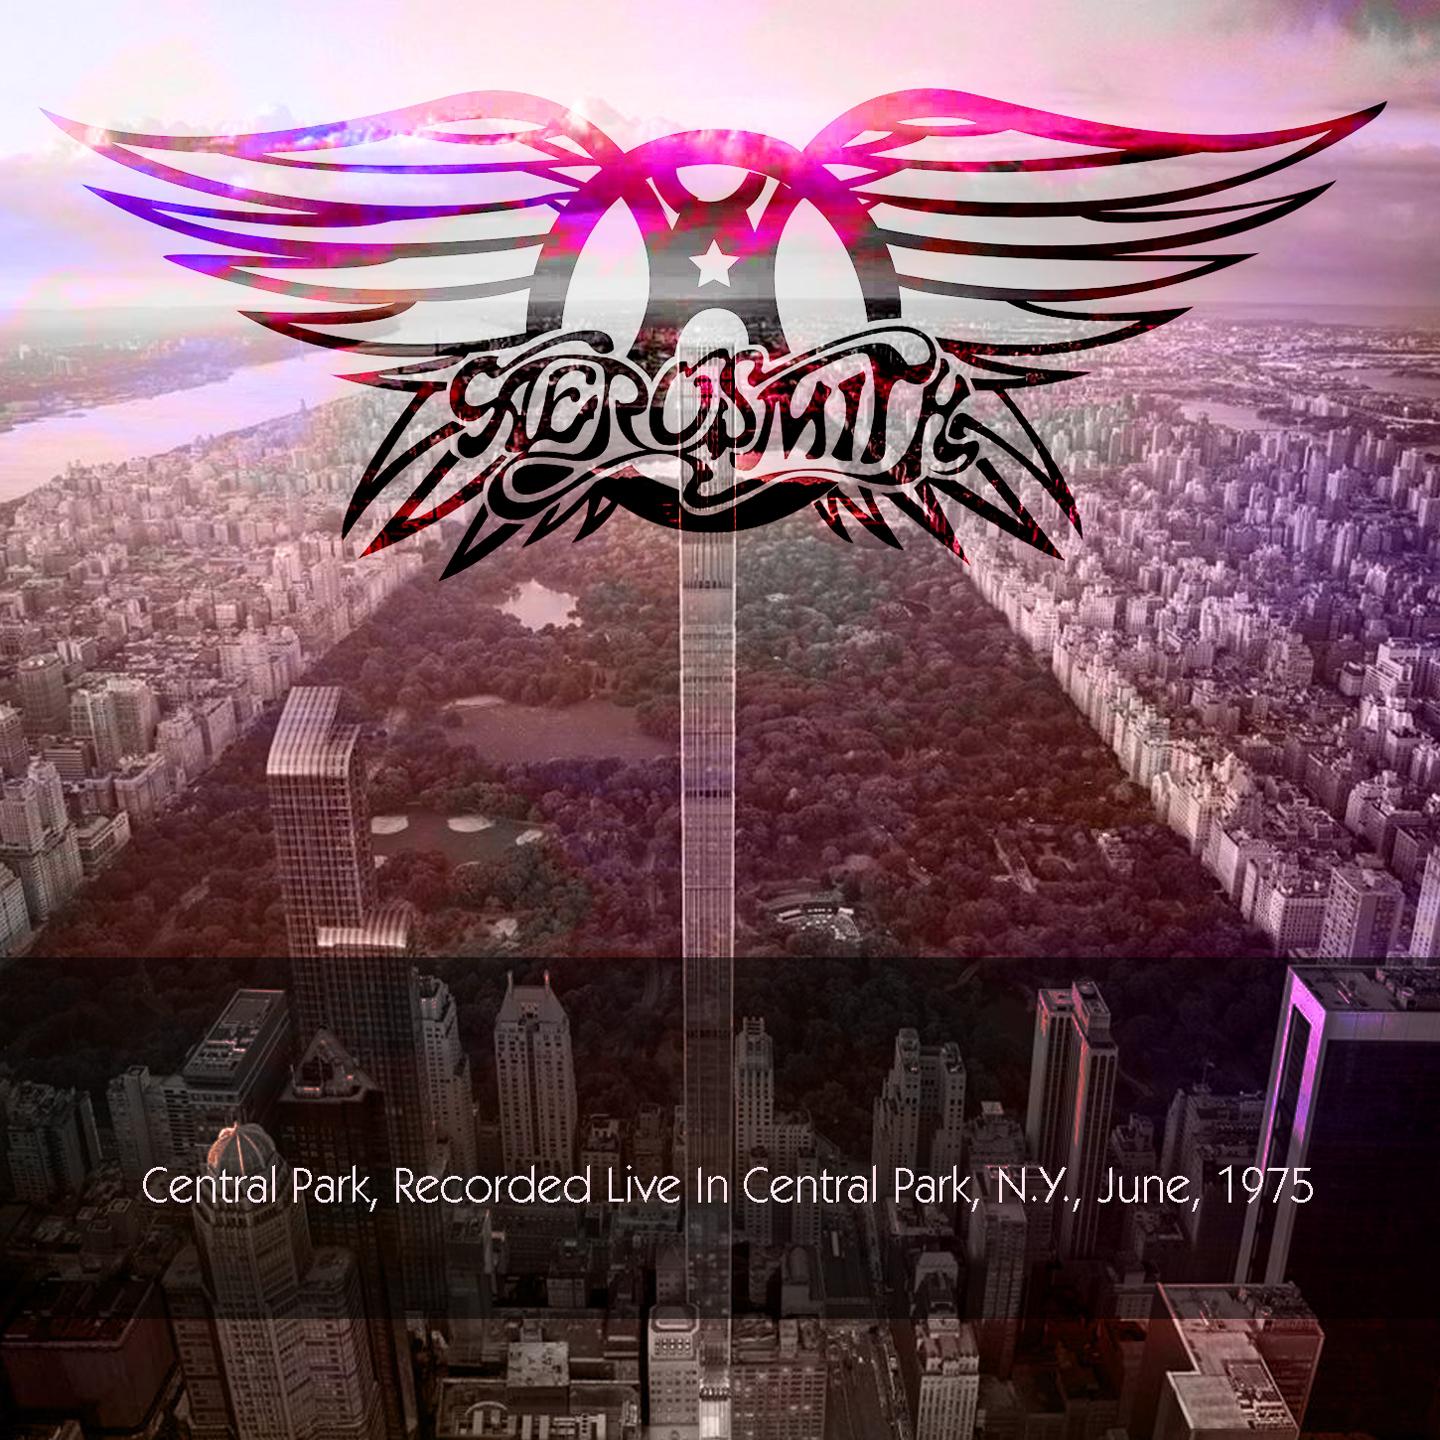 Aerosmith: Central Park, Recorded Live In Central Park, N.Y., June, 1975